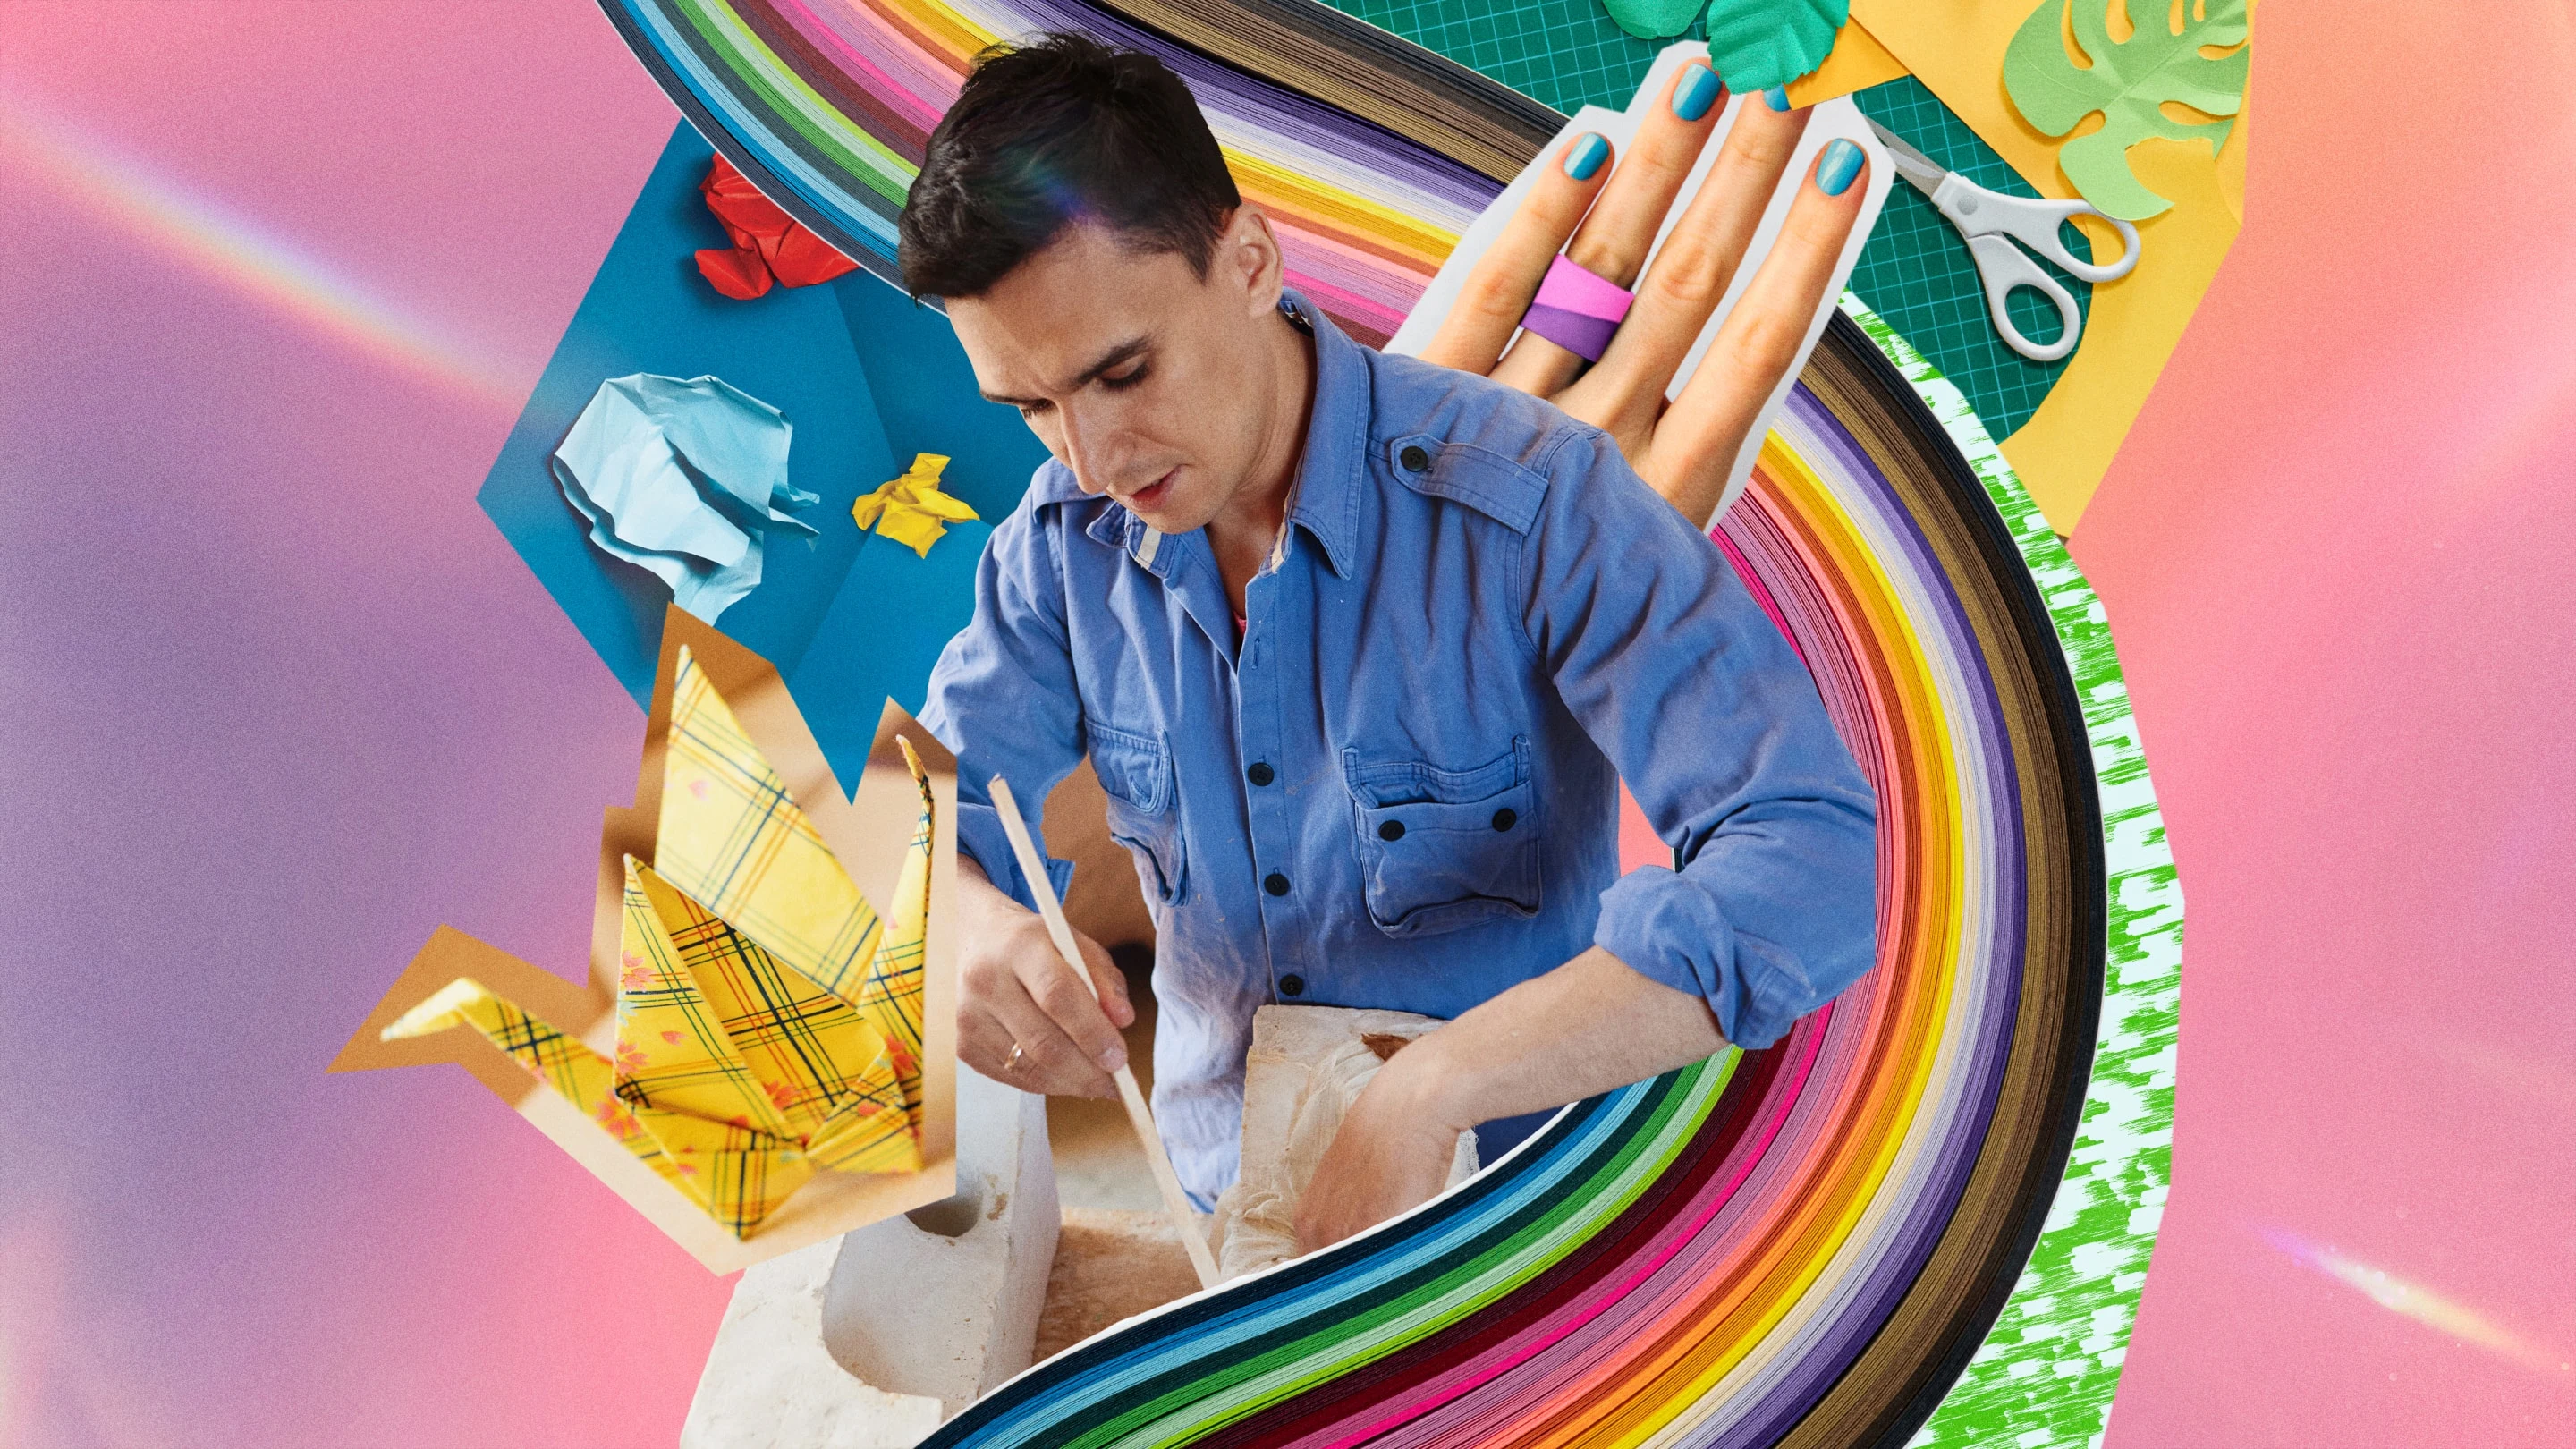 Collage featuring a crafty white man surrounded by a rainbow of colourful paper, a crafting scissors, a hand modelling a paper ring and pieces of origami.